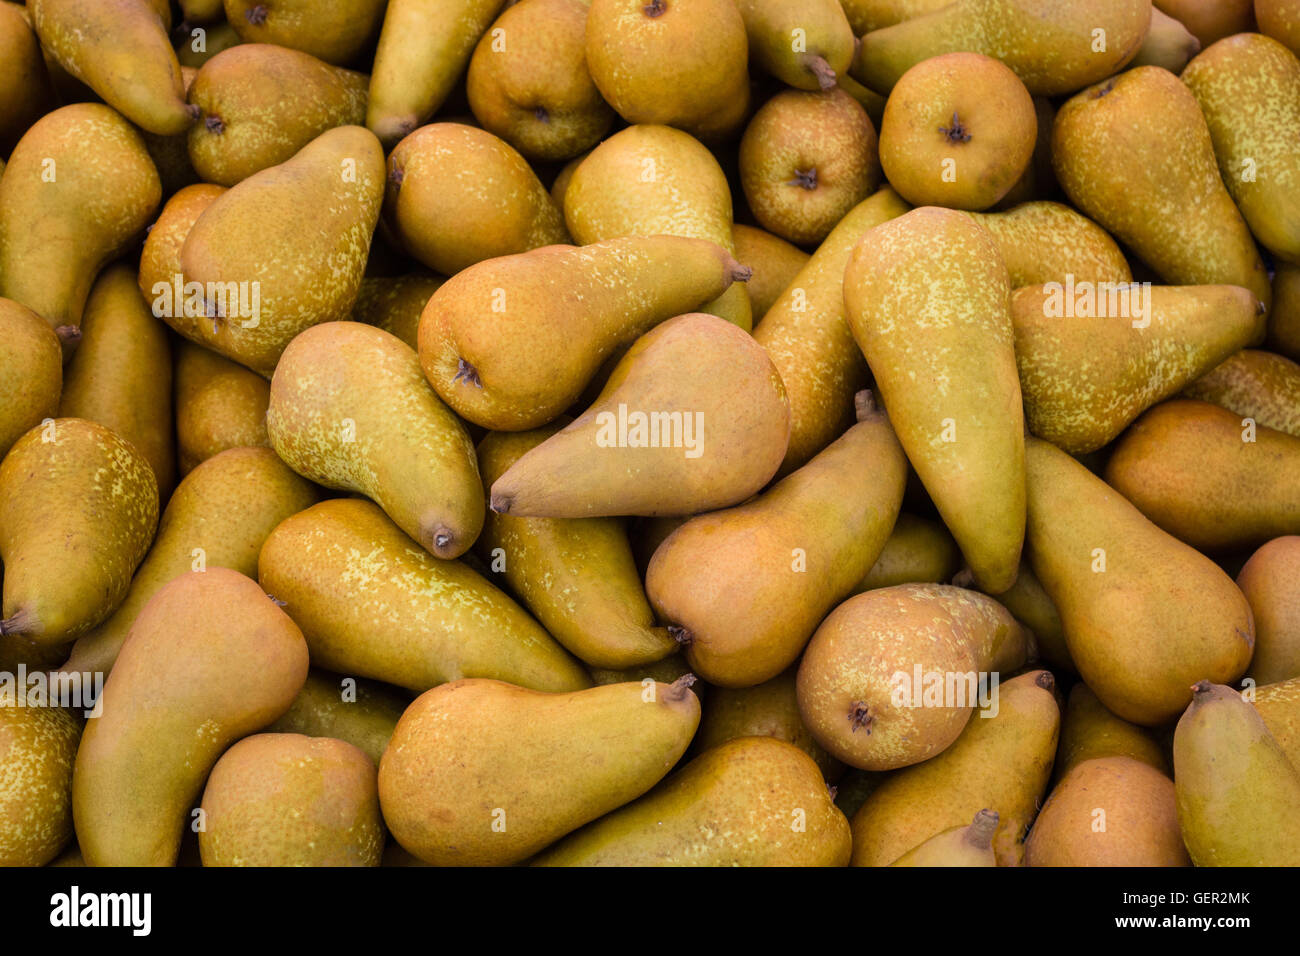 group of pear fruits macro on food market Stock Photo